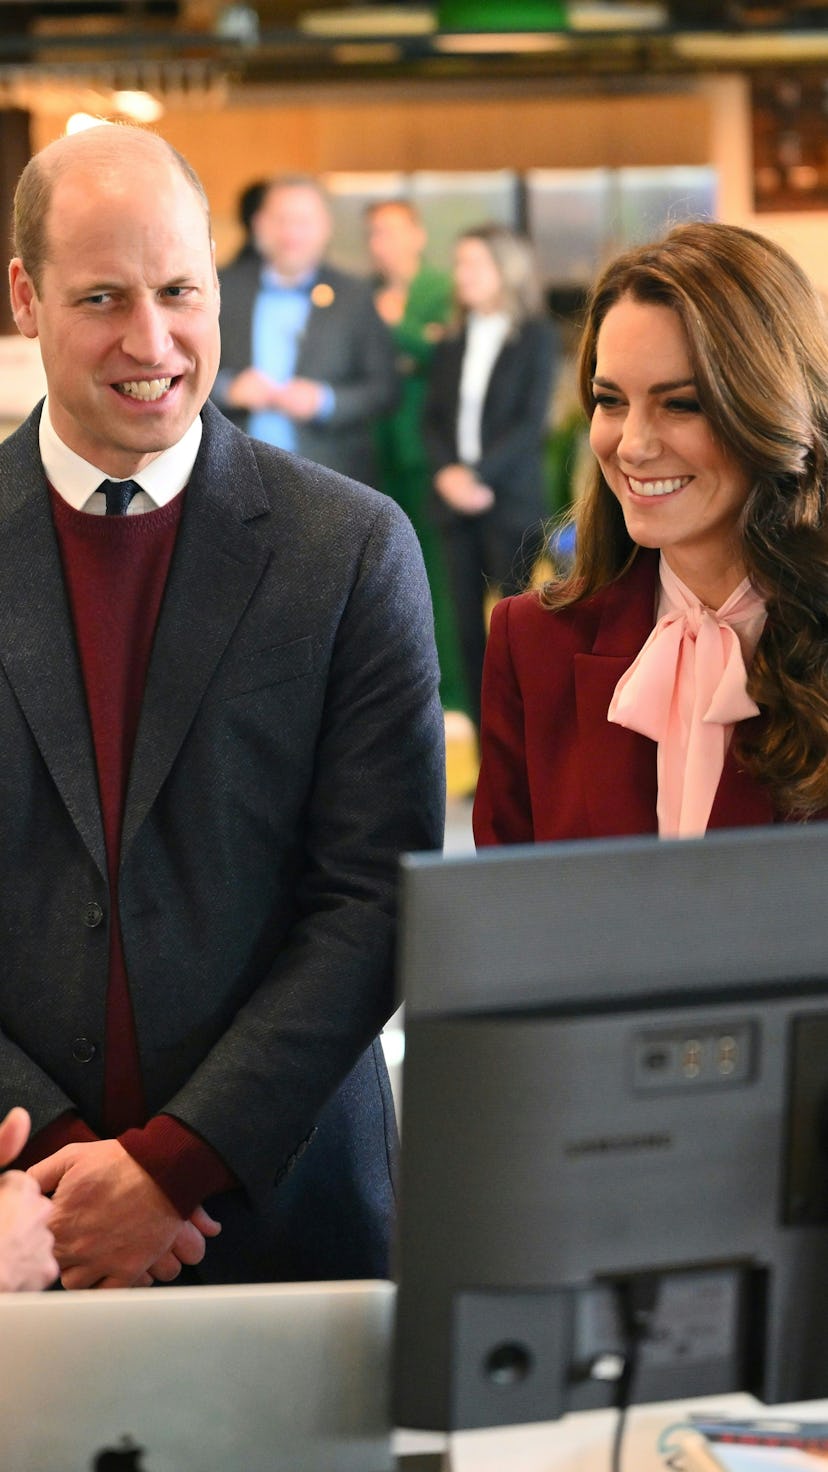 Kate Middleton & Prince William Were Booed & Mocked On Their U.S. Visit During A Boston Celtics Game